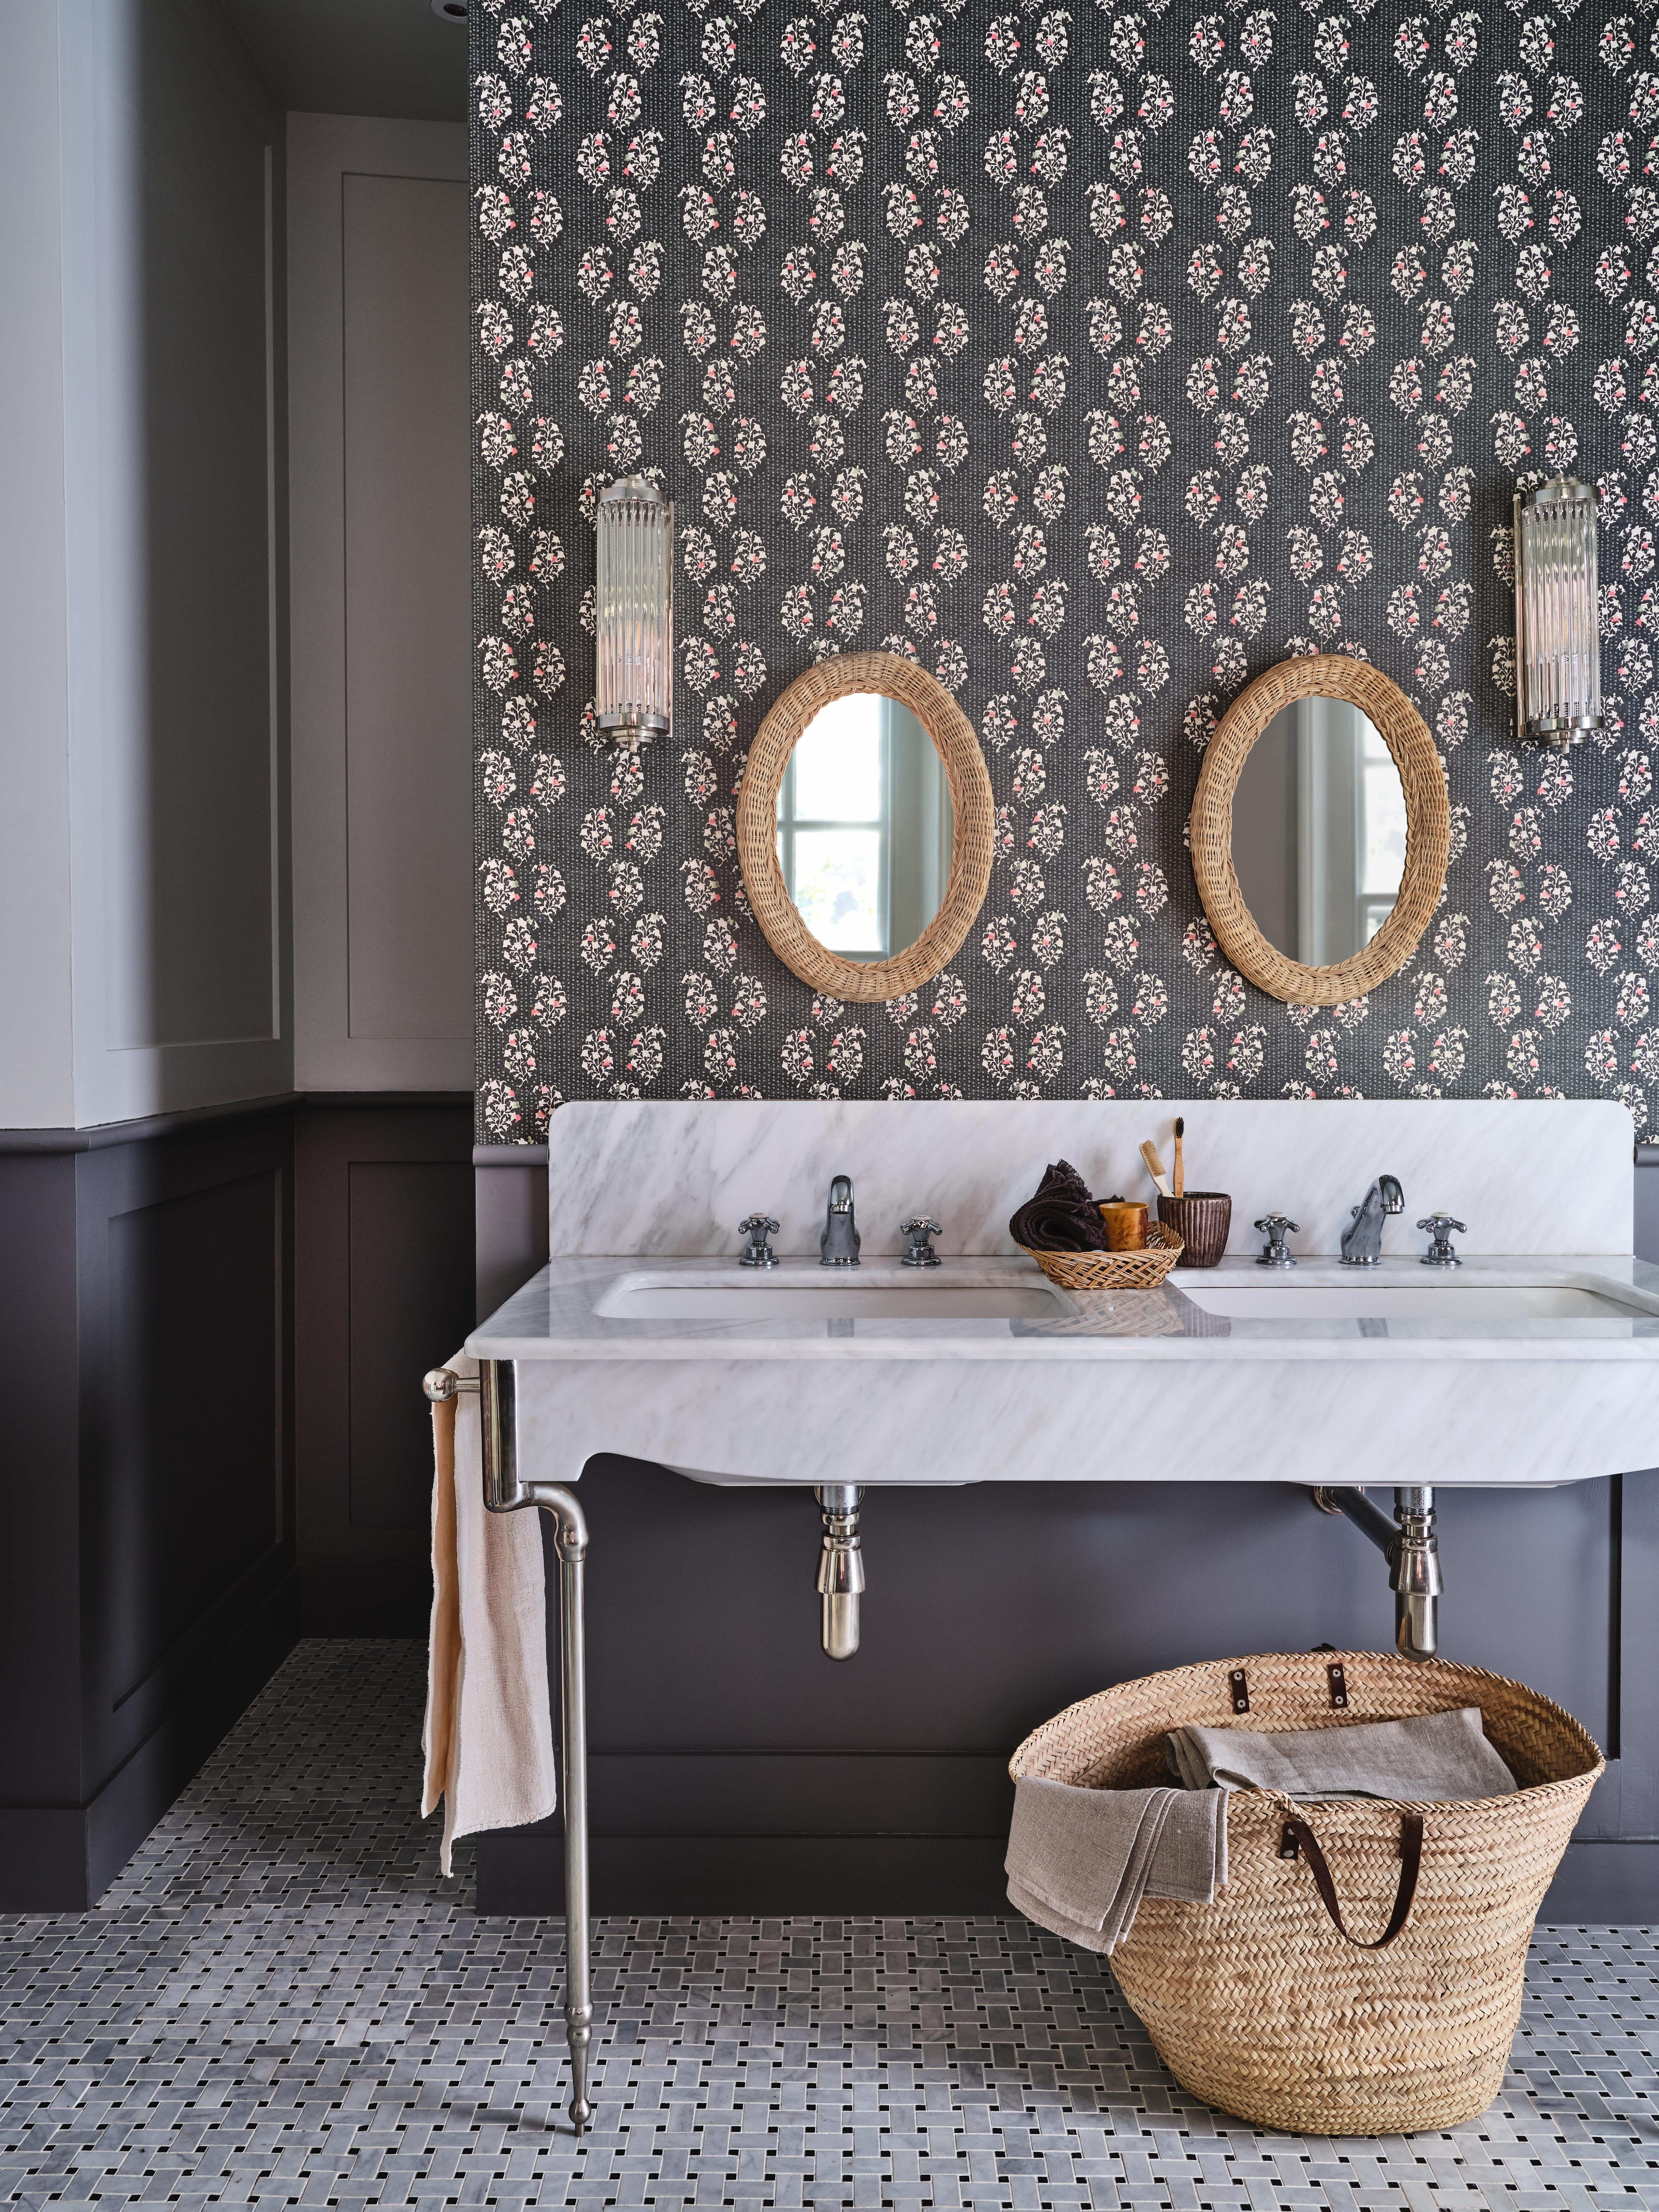 13 of the best wallpapers for bathrooms